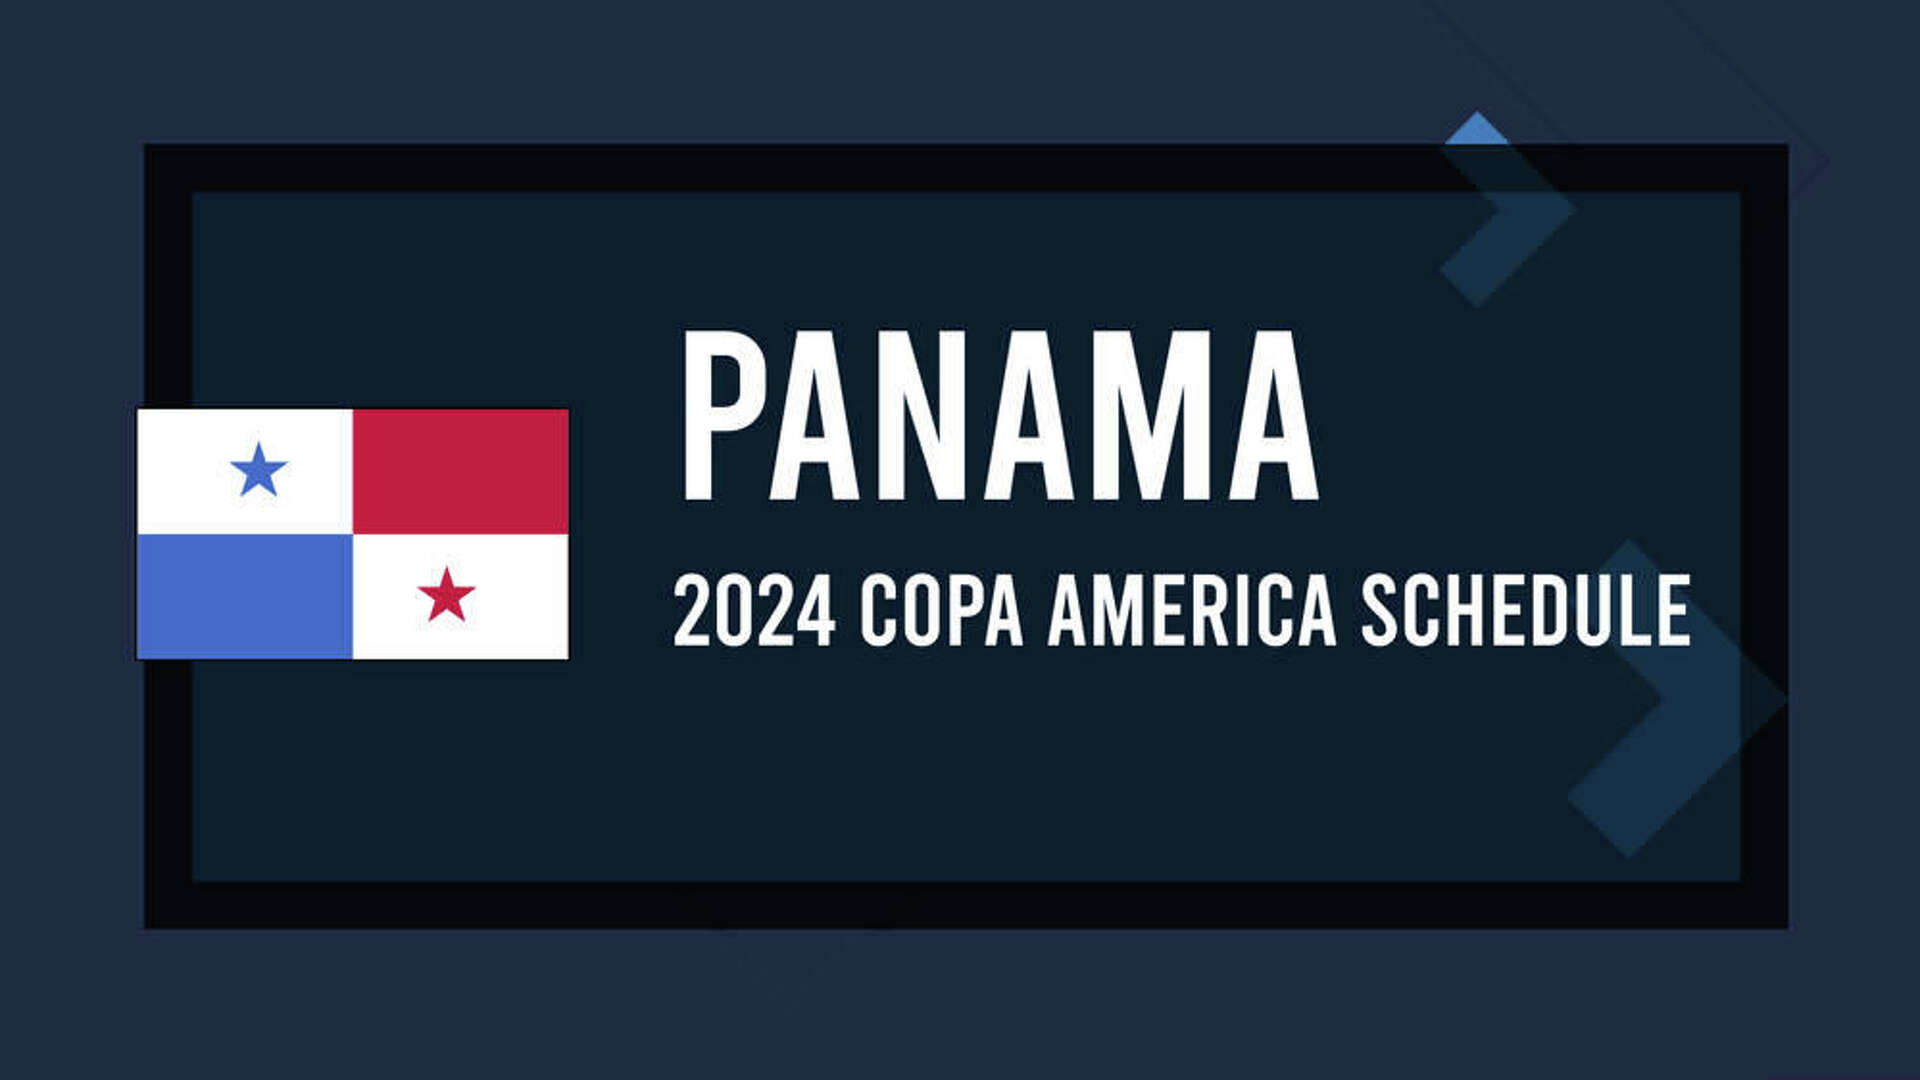 Copa America 2024 Panama Schedule, Start Times and Game Info